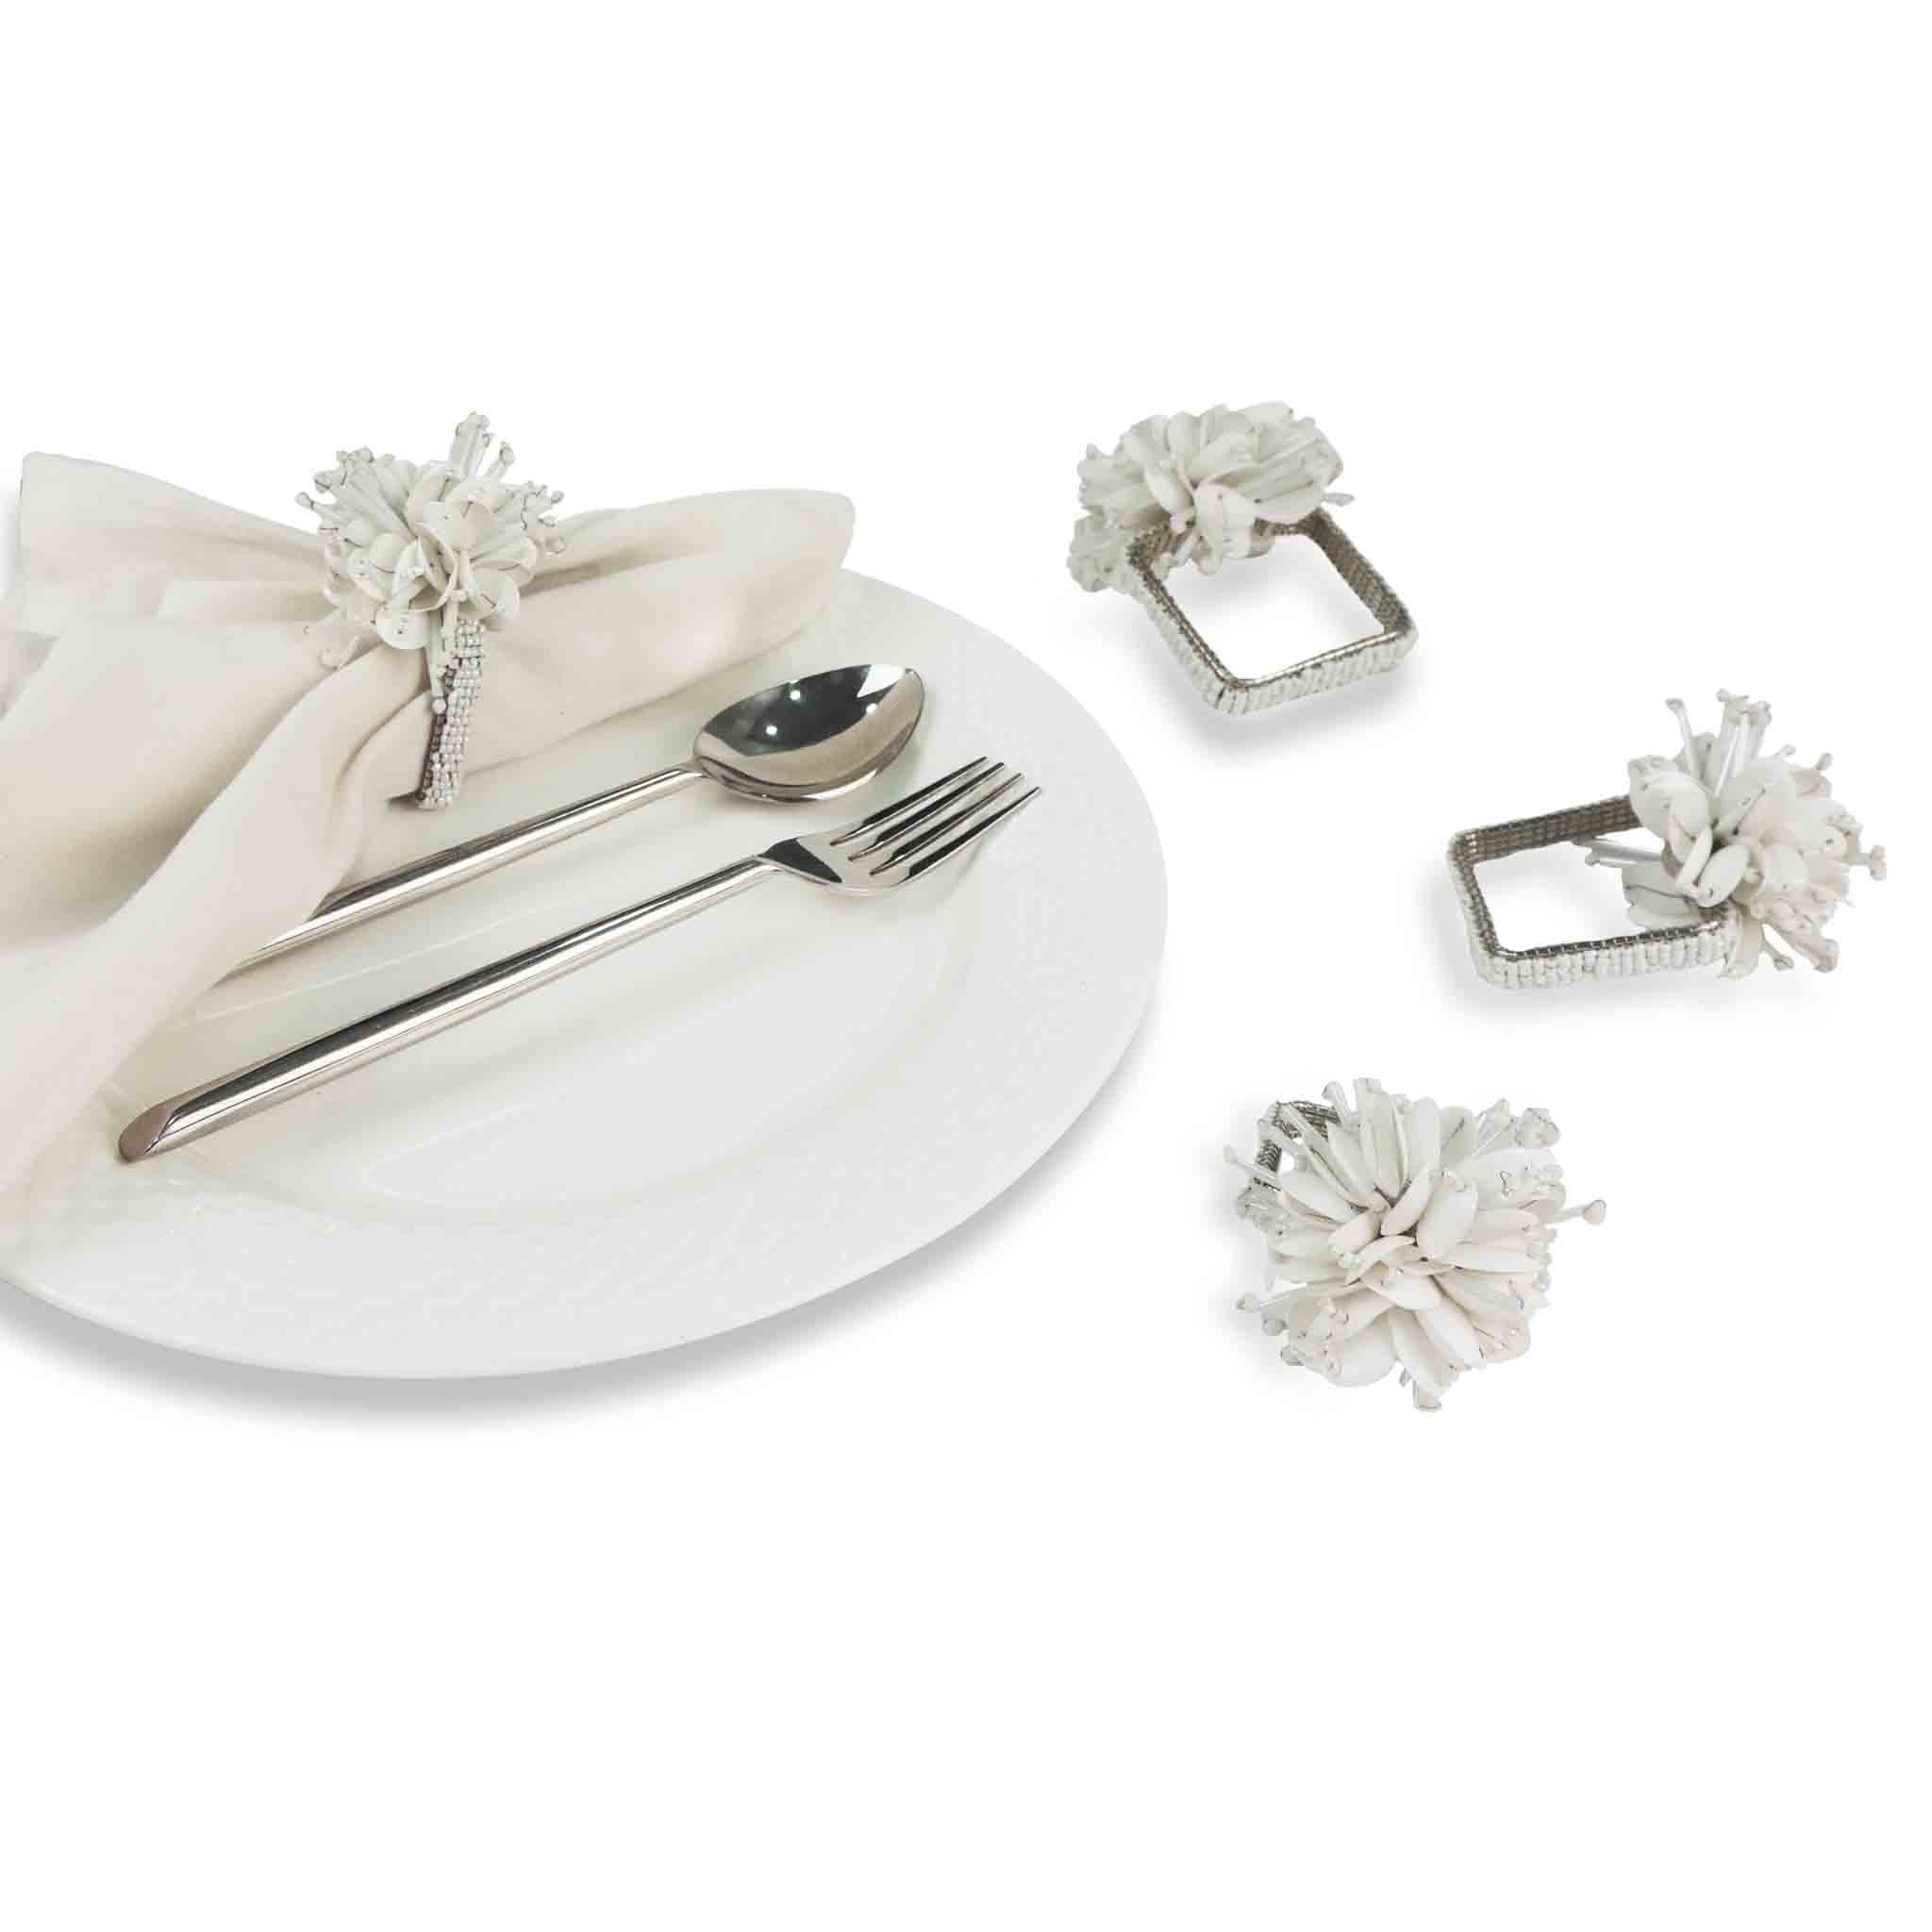 Corsage Napkin Ring in White, Set of 4